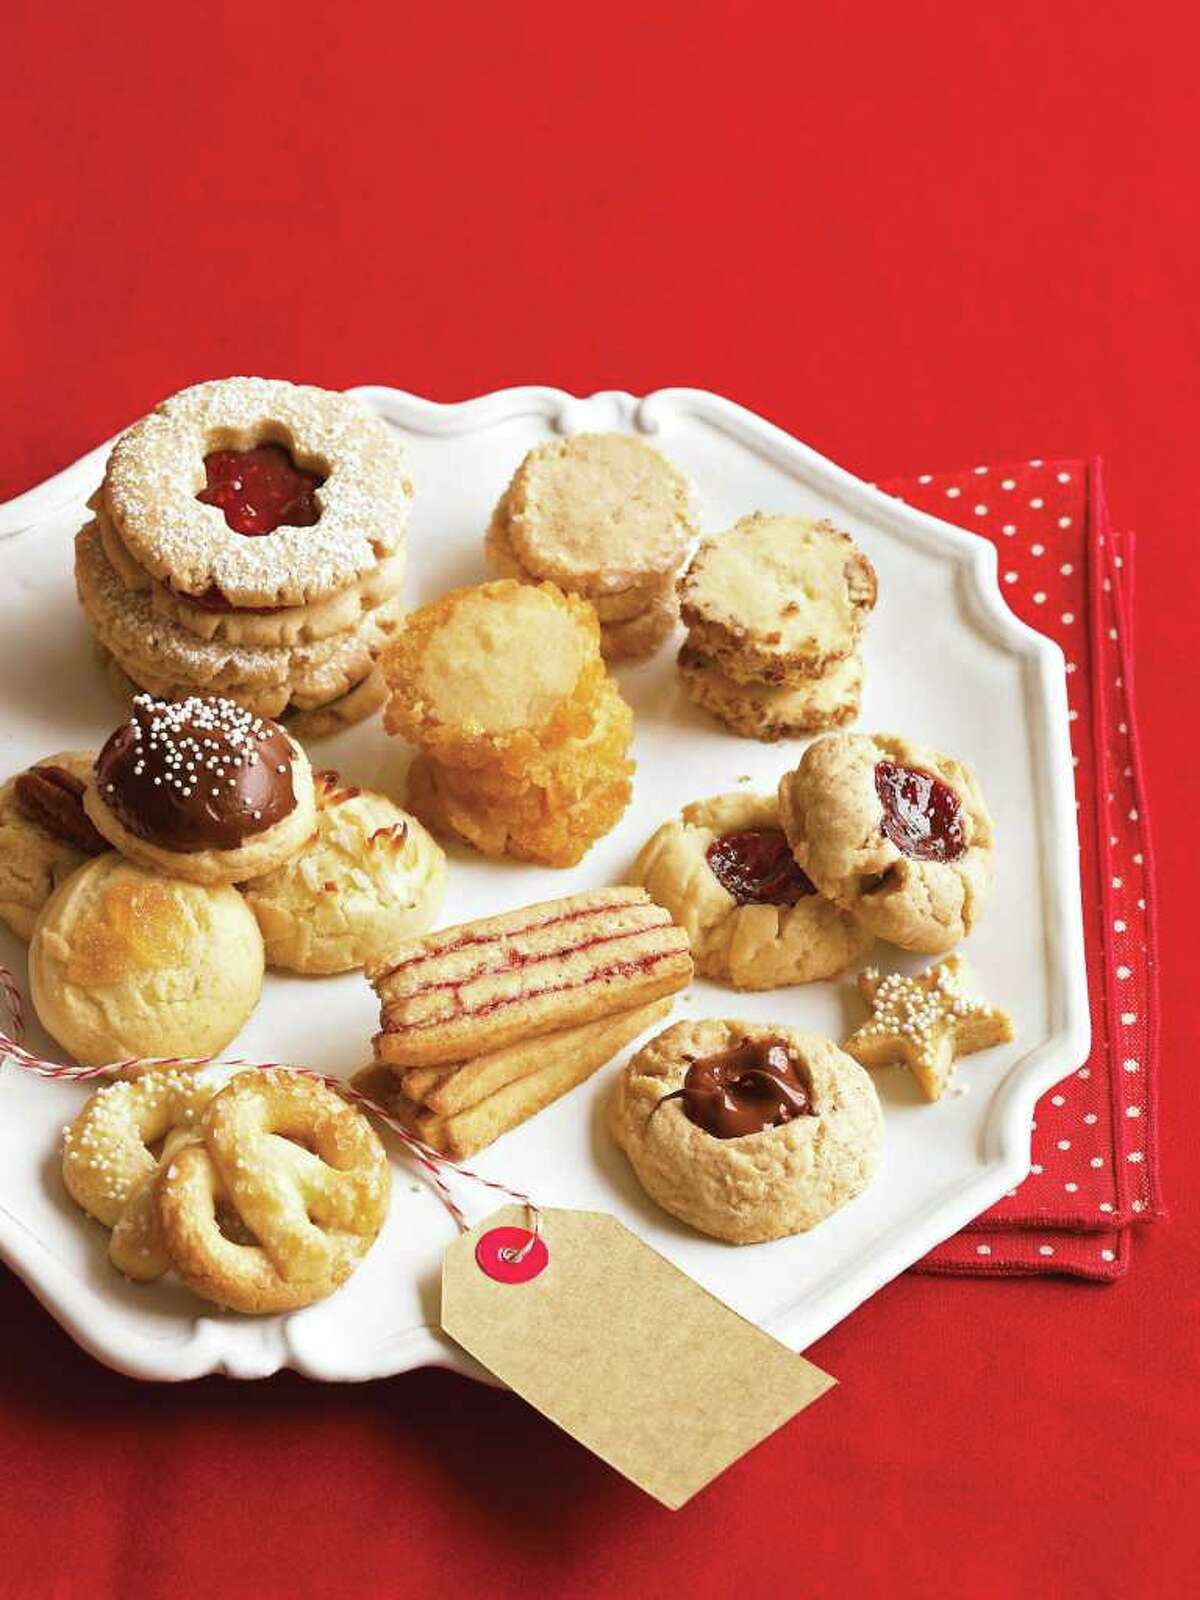 Cookies featured in Sandra Rose Gluck recipes, originally published in 2008